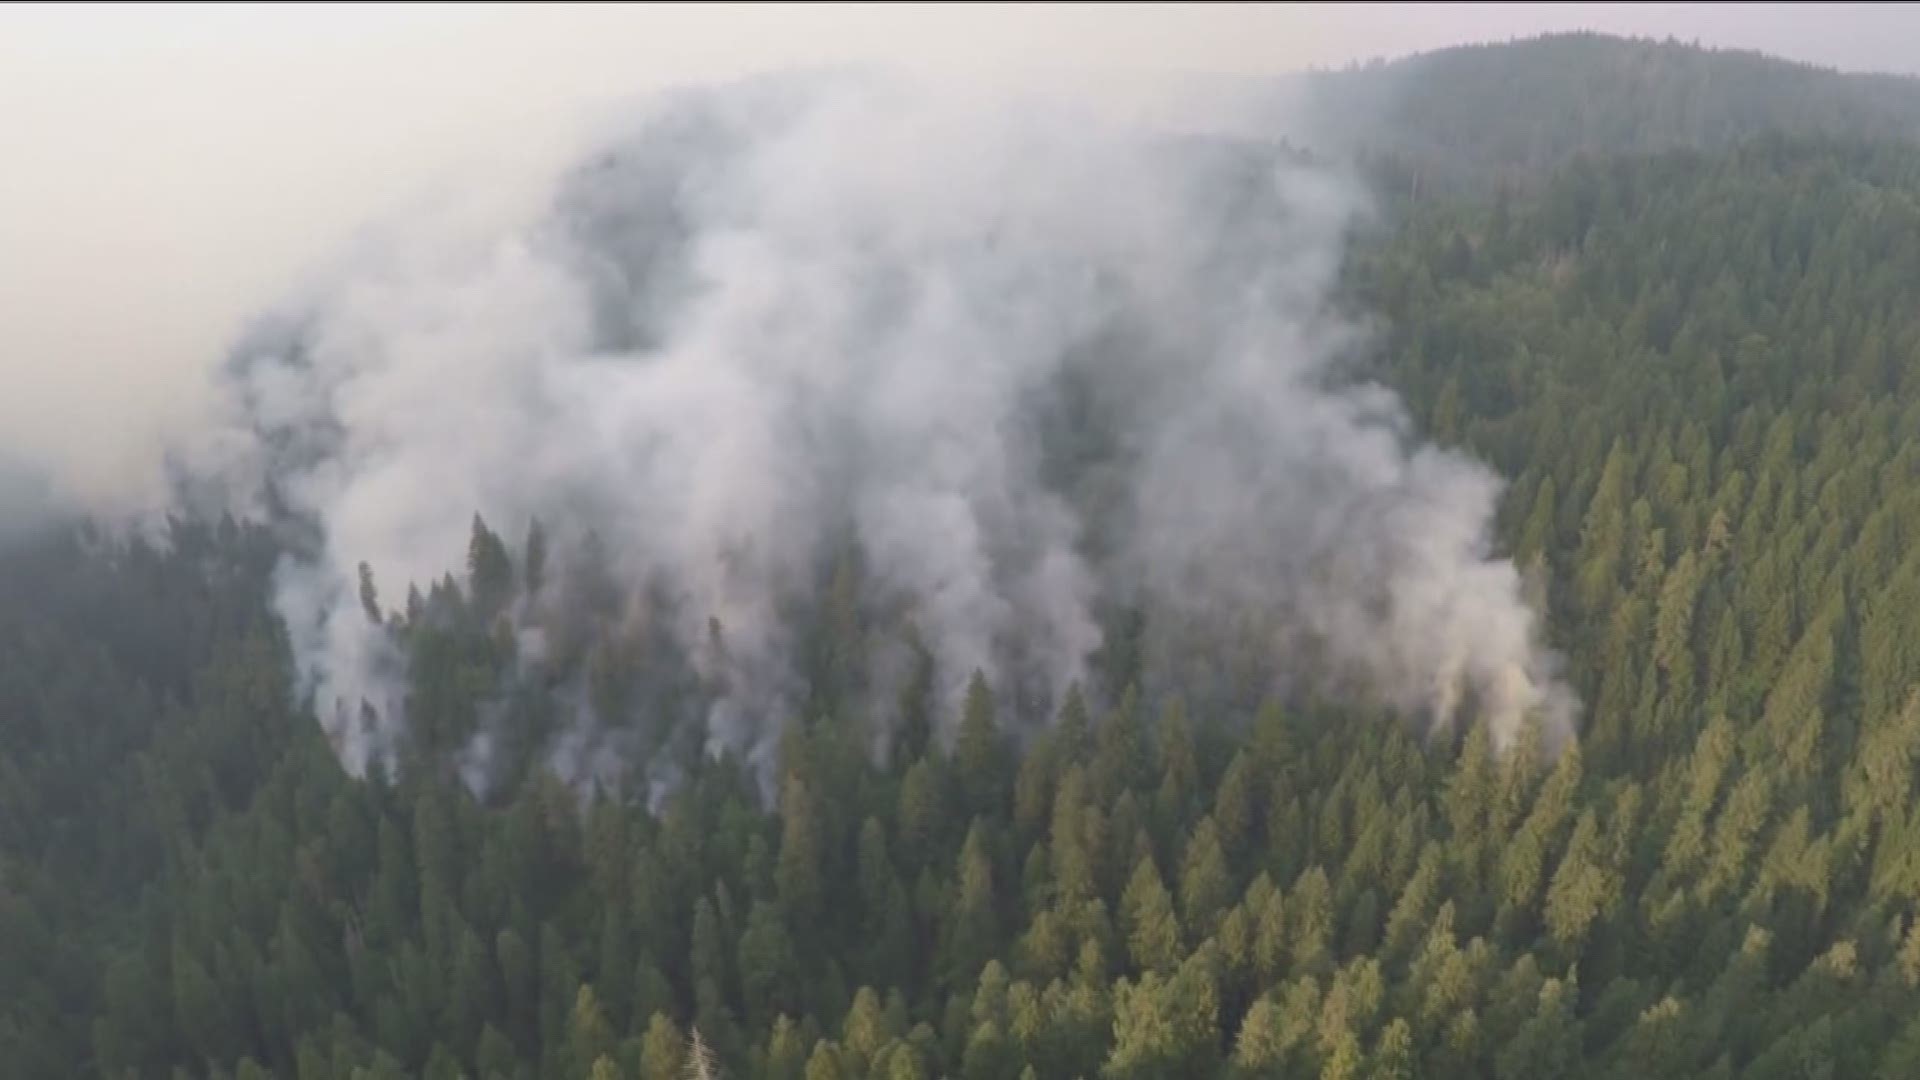 Idaho's congressional delegation talked about how the new funding will help fight wildfires.